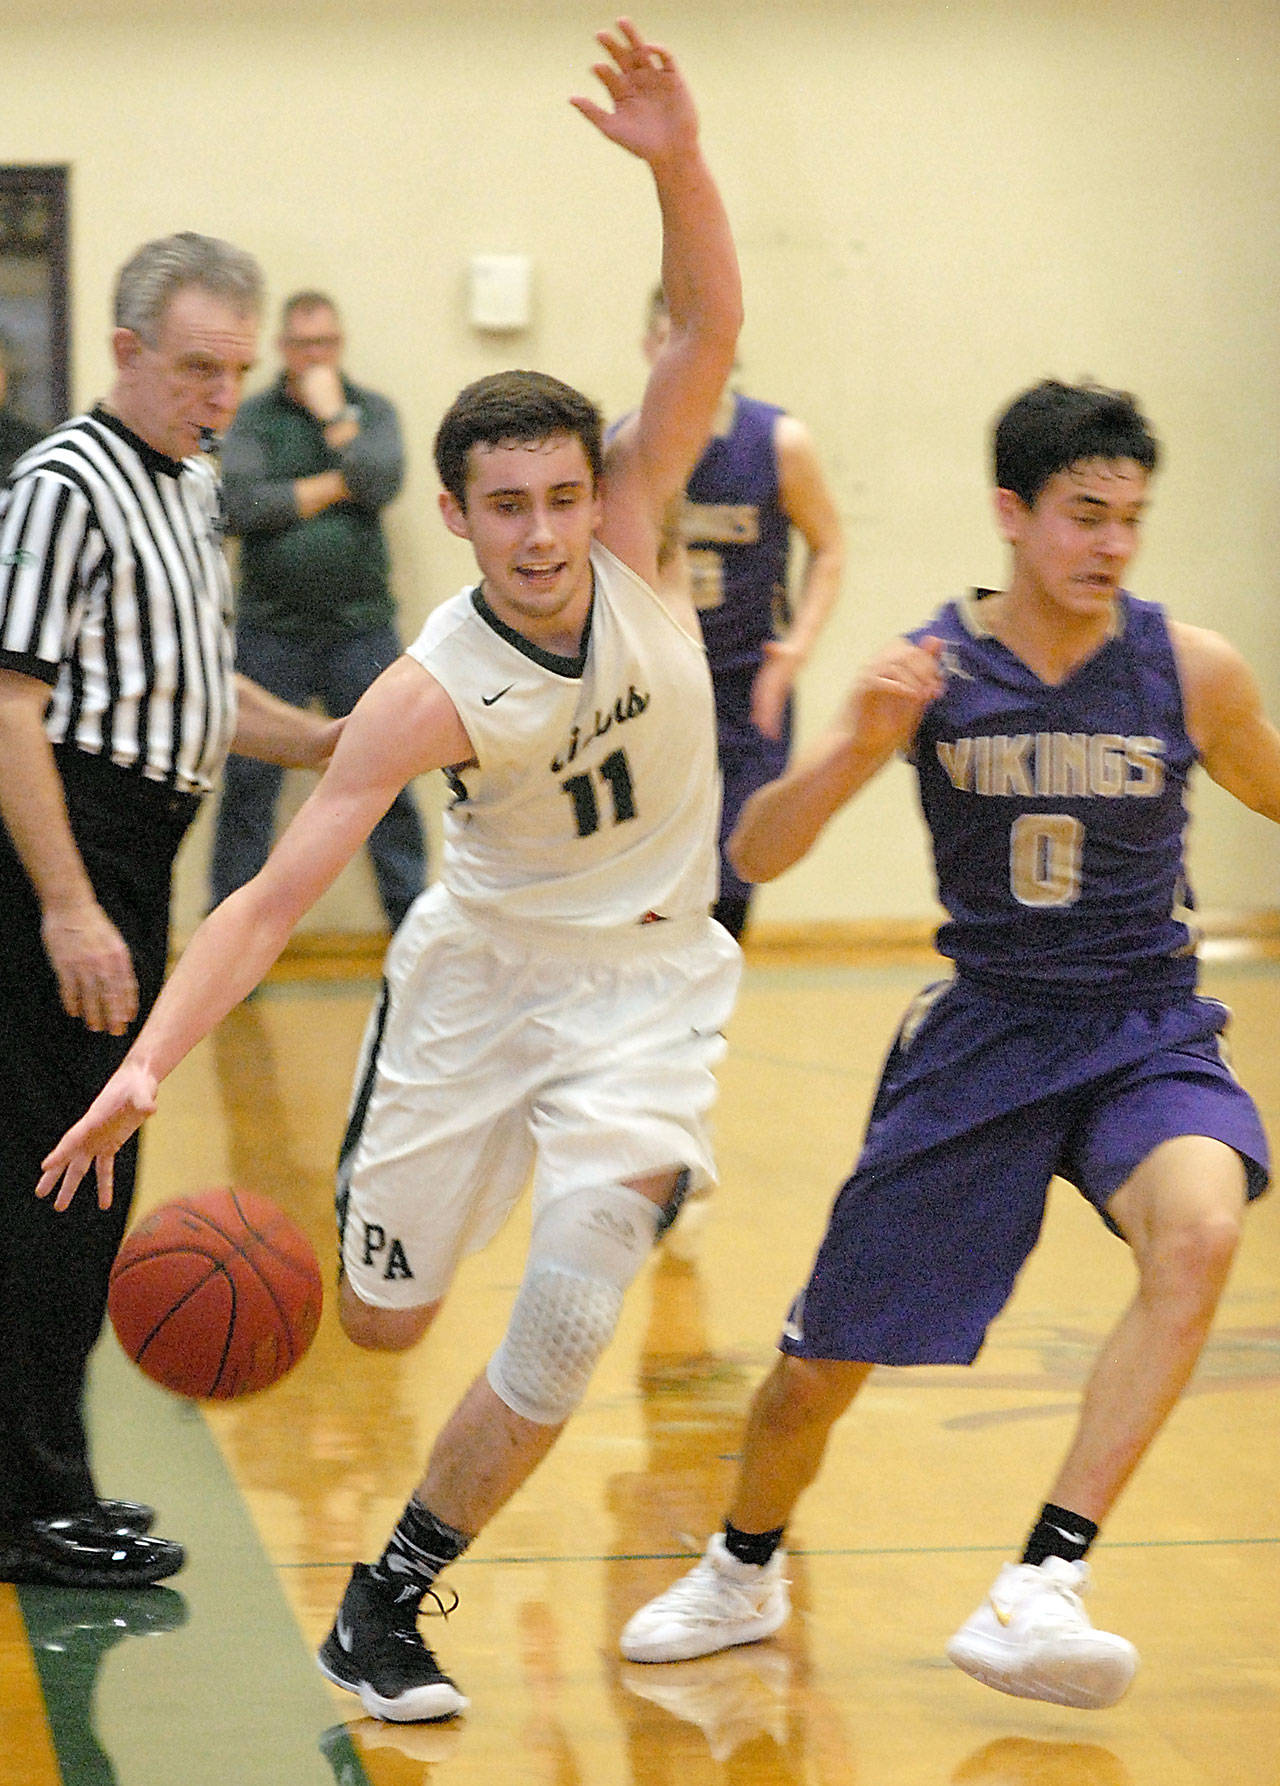 Keith Thorpe/Peninsula Daily News Port Angeles’ Kyle Benedict, center, struggles to keep himself and the ball in bounds while racing North Kitsap’s Johny Olmsted down court as referee John Hayden, left, keeps watch on Friday night at Port Angeles High School.